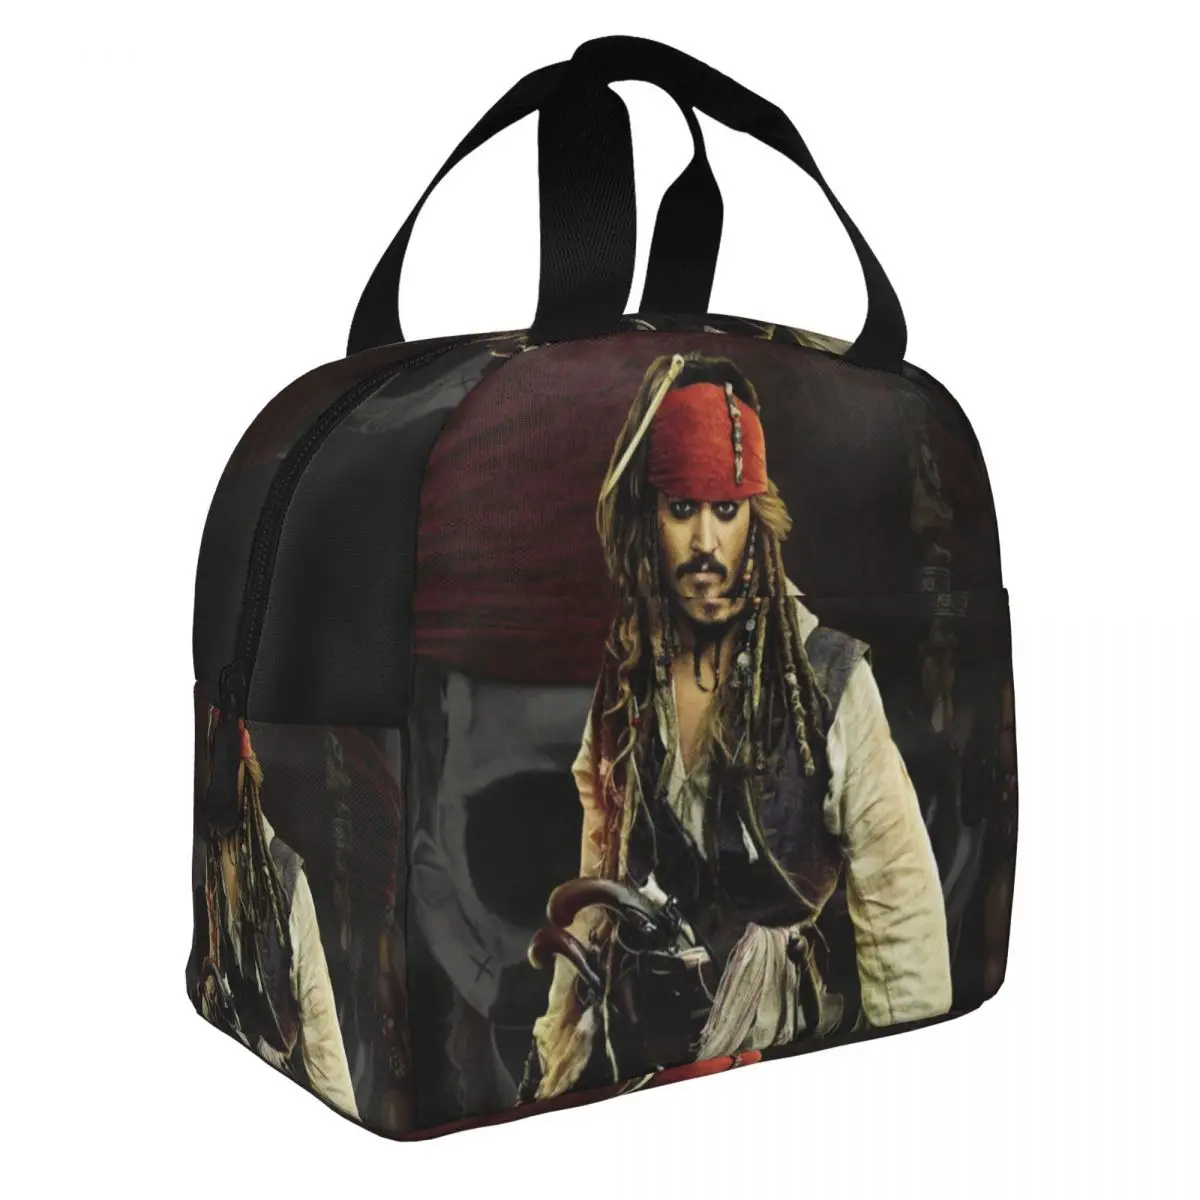 Pirates Of The Caribbean Lunch Bento Bags Portable Aluminum Foil thickened Thermal Cloth Lunch Bag for Women Men Boy